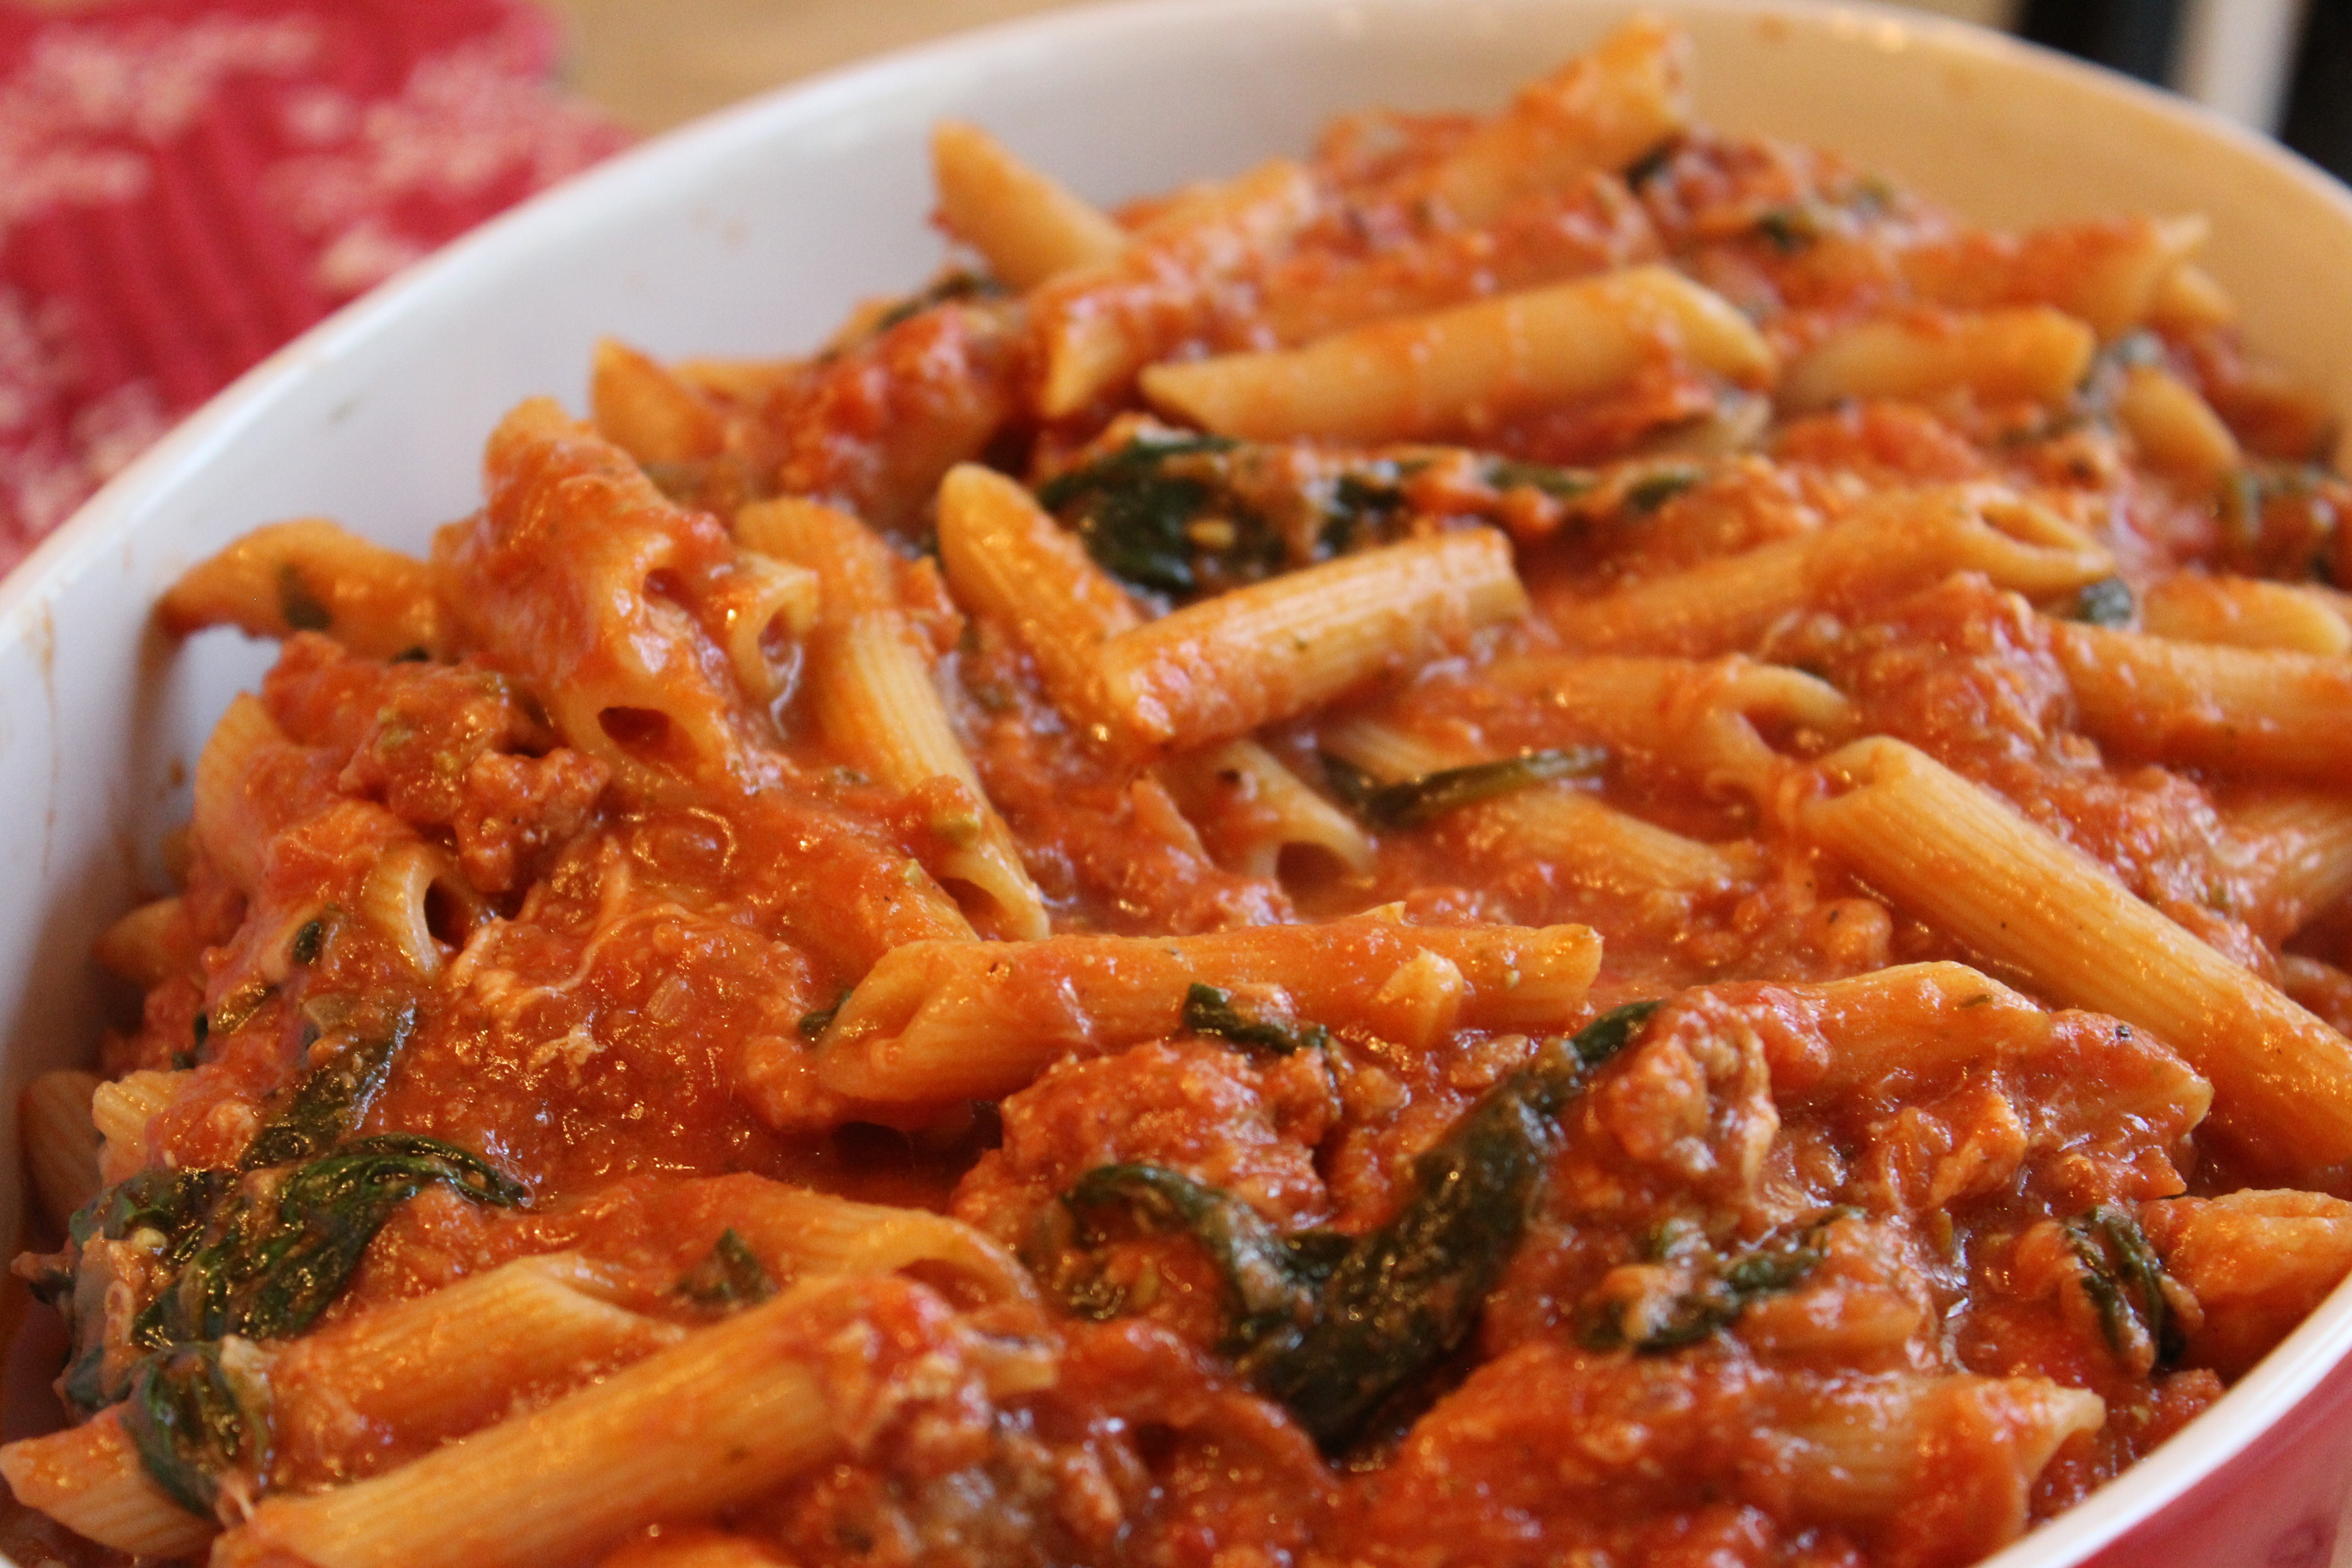 Baked Ziti with Spicy Tomato Sausage Sauce